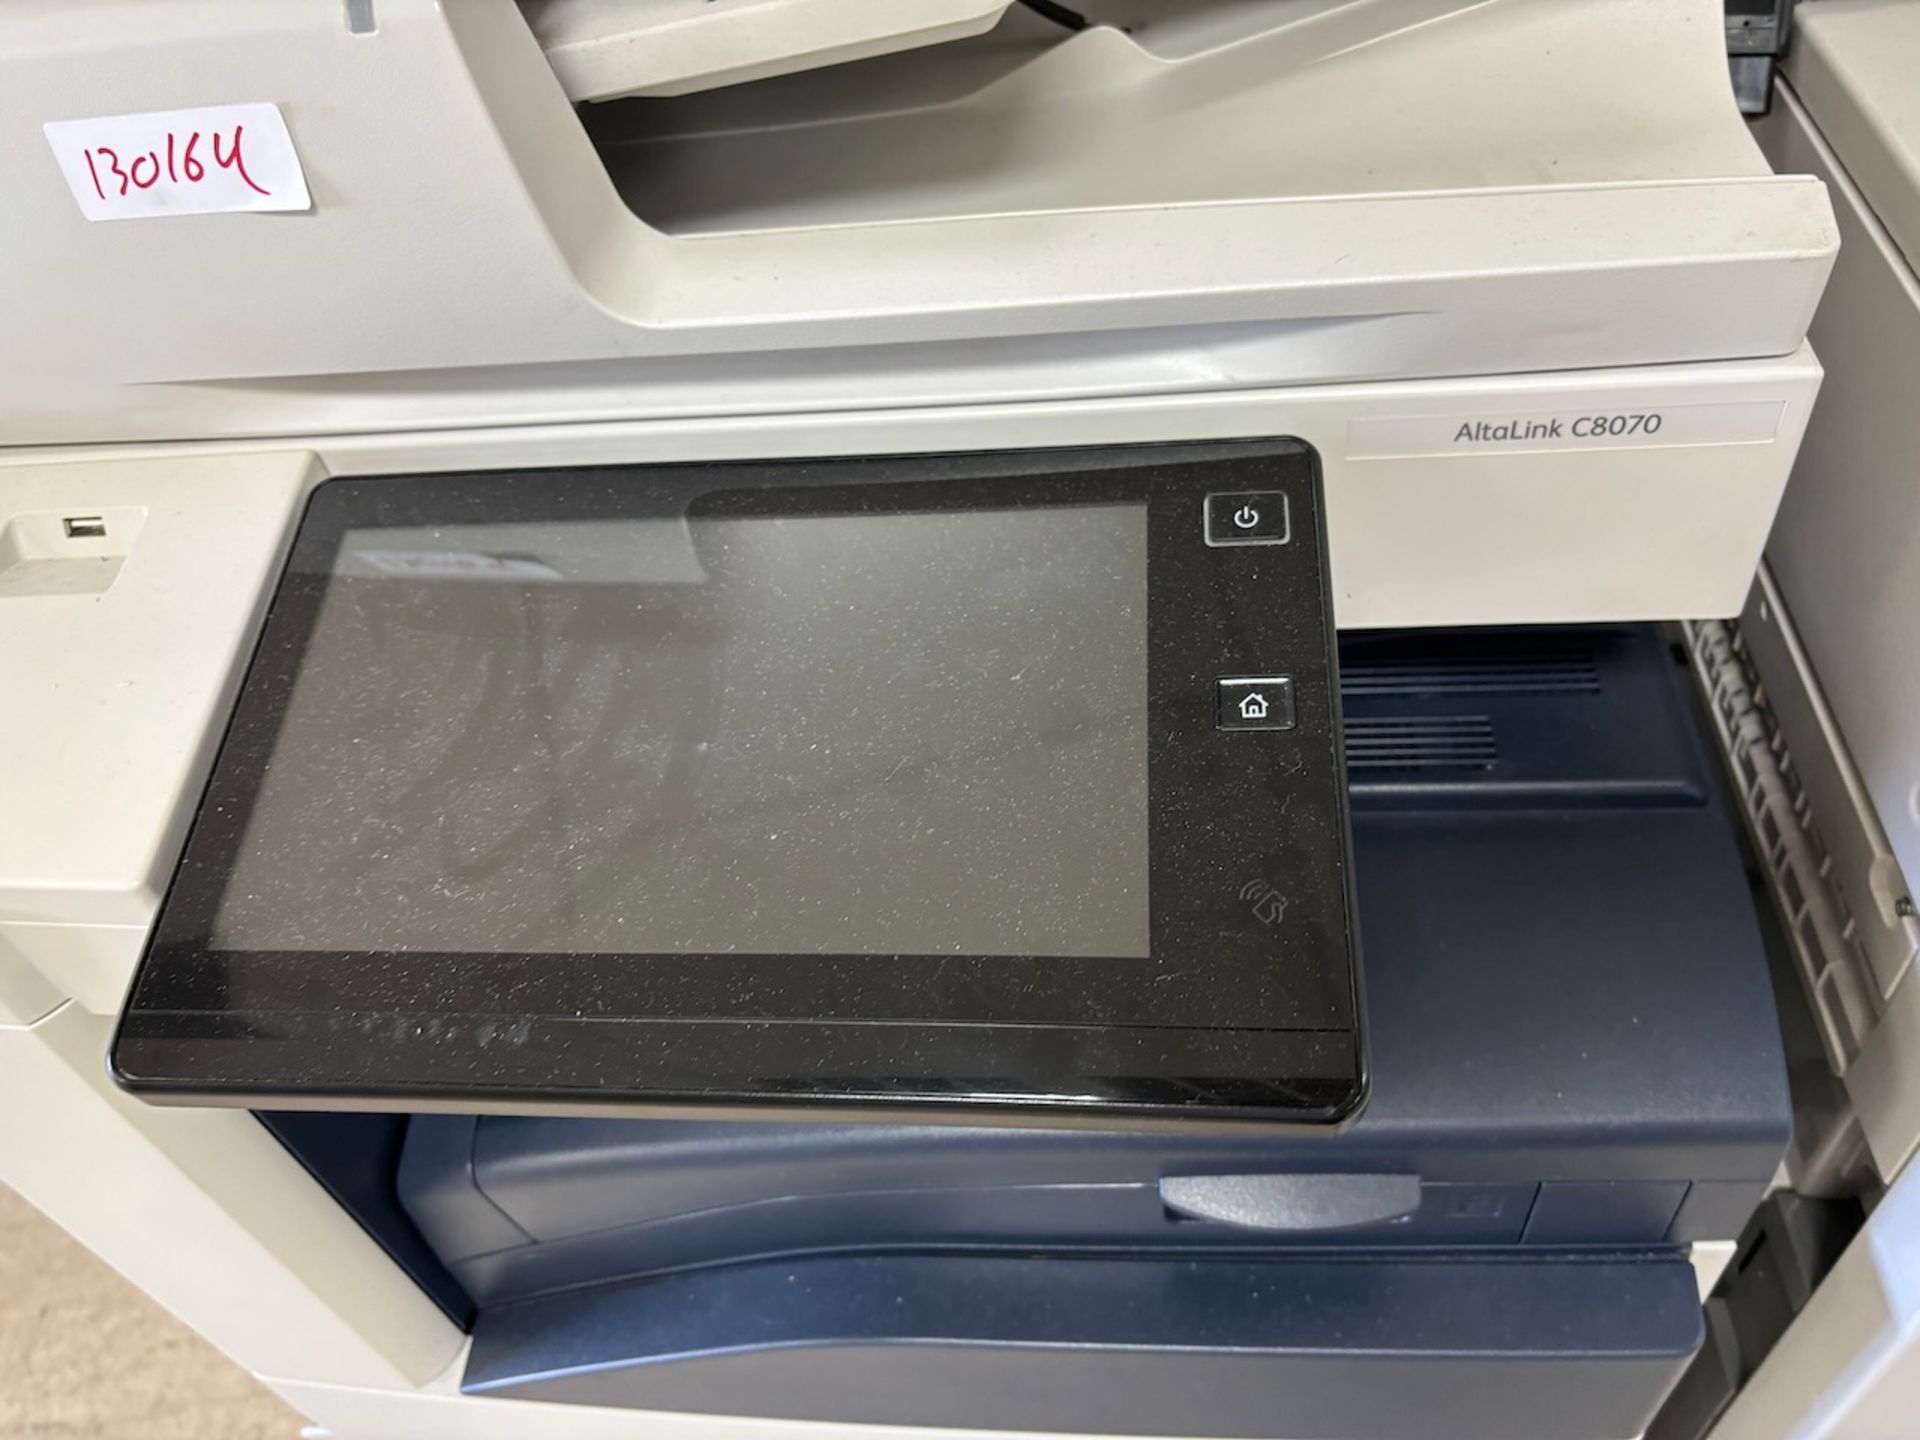 2019 Xerox Multifunction Color Printer - See Auctioneers Note - Image 2 of 5